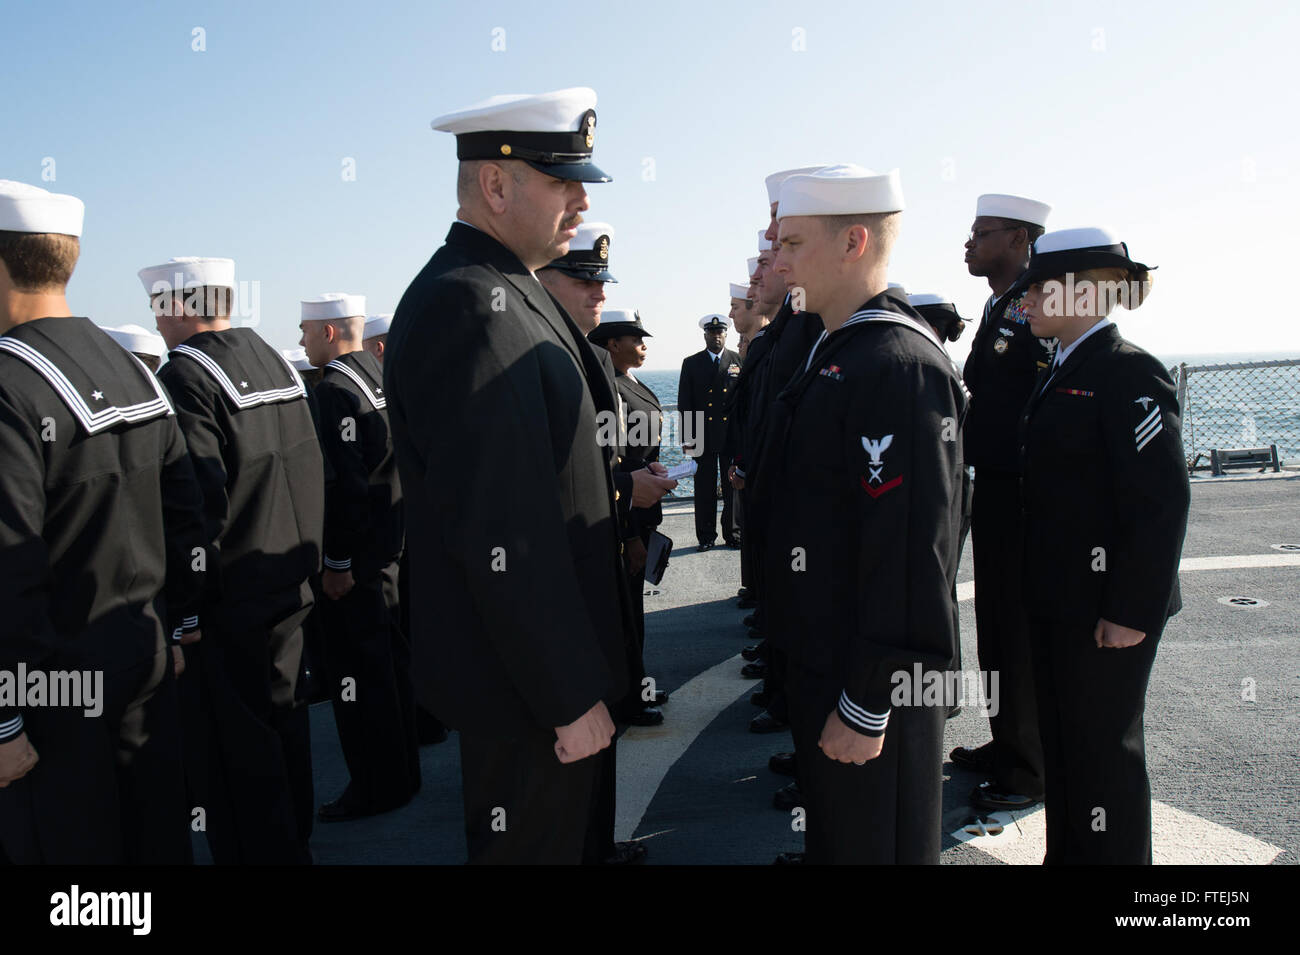 BLACK SEA (Nov. 6, 2014) - Sailors aboard the USS Ross (DDG 71) conduct a dress blue uniform inspection. Ross is an Arleigh Burke-class guided-missile destroyer, homeported in Rota, Spain, conducting naval operations in the U.S. 6th Fleet area of operations in support of U.S. national security interest in Europe Stock Photo